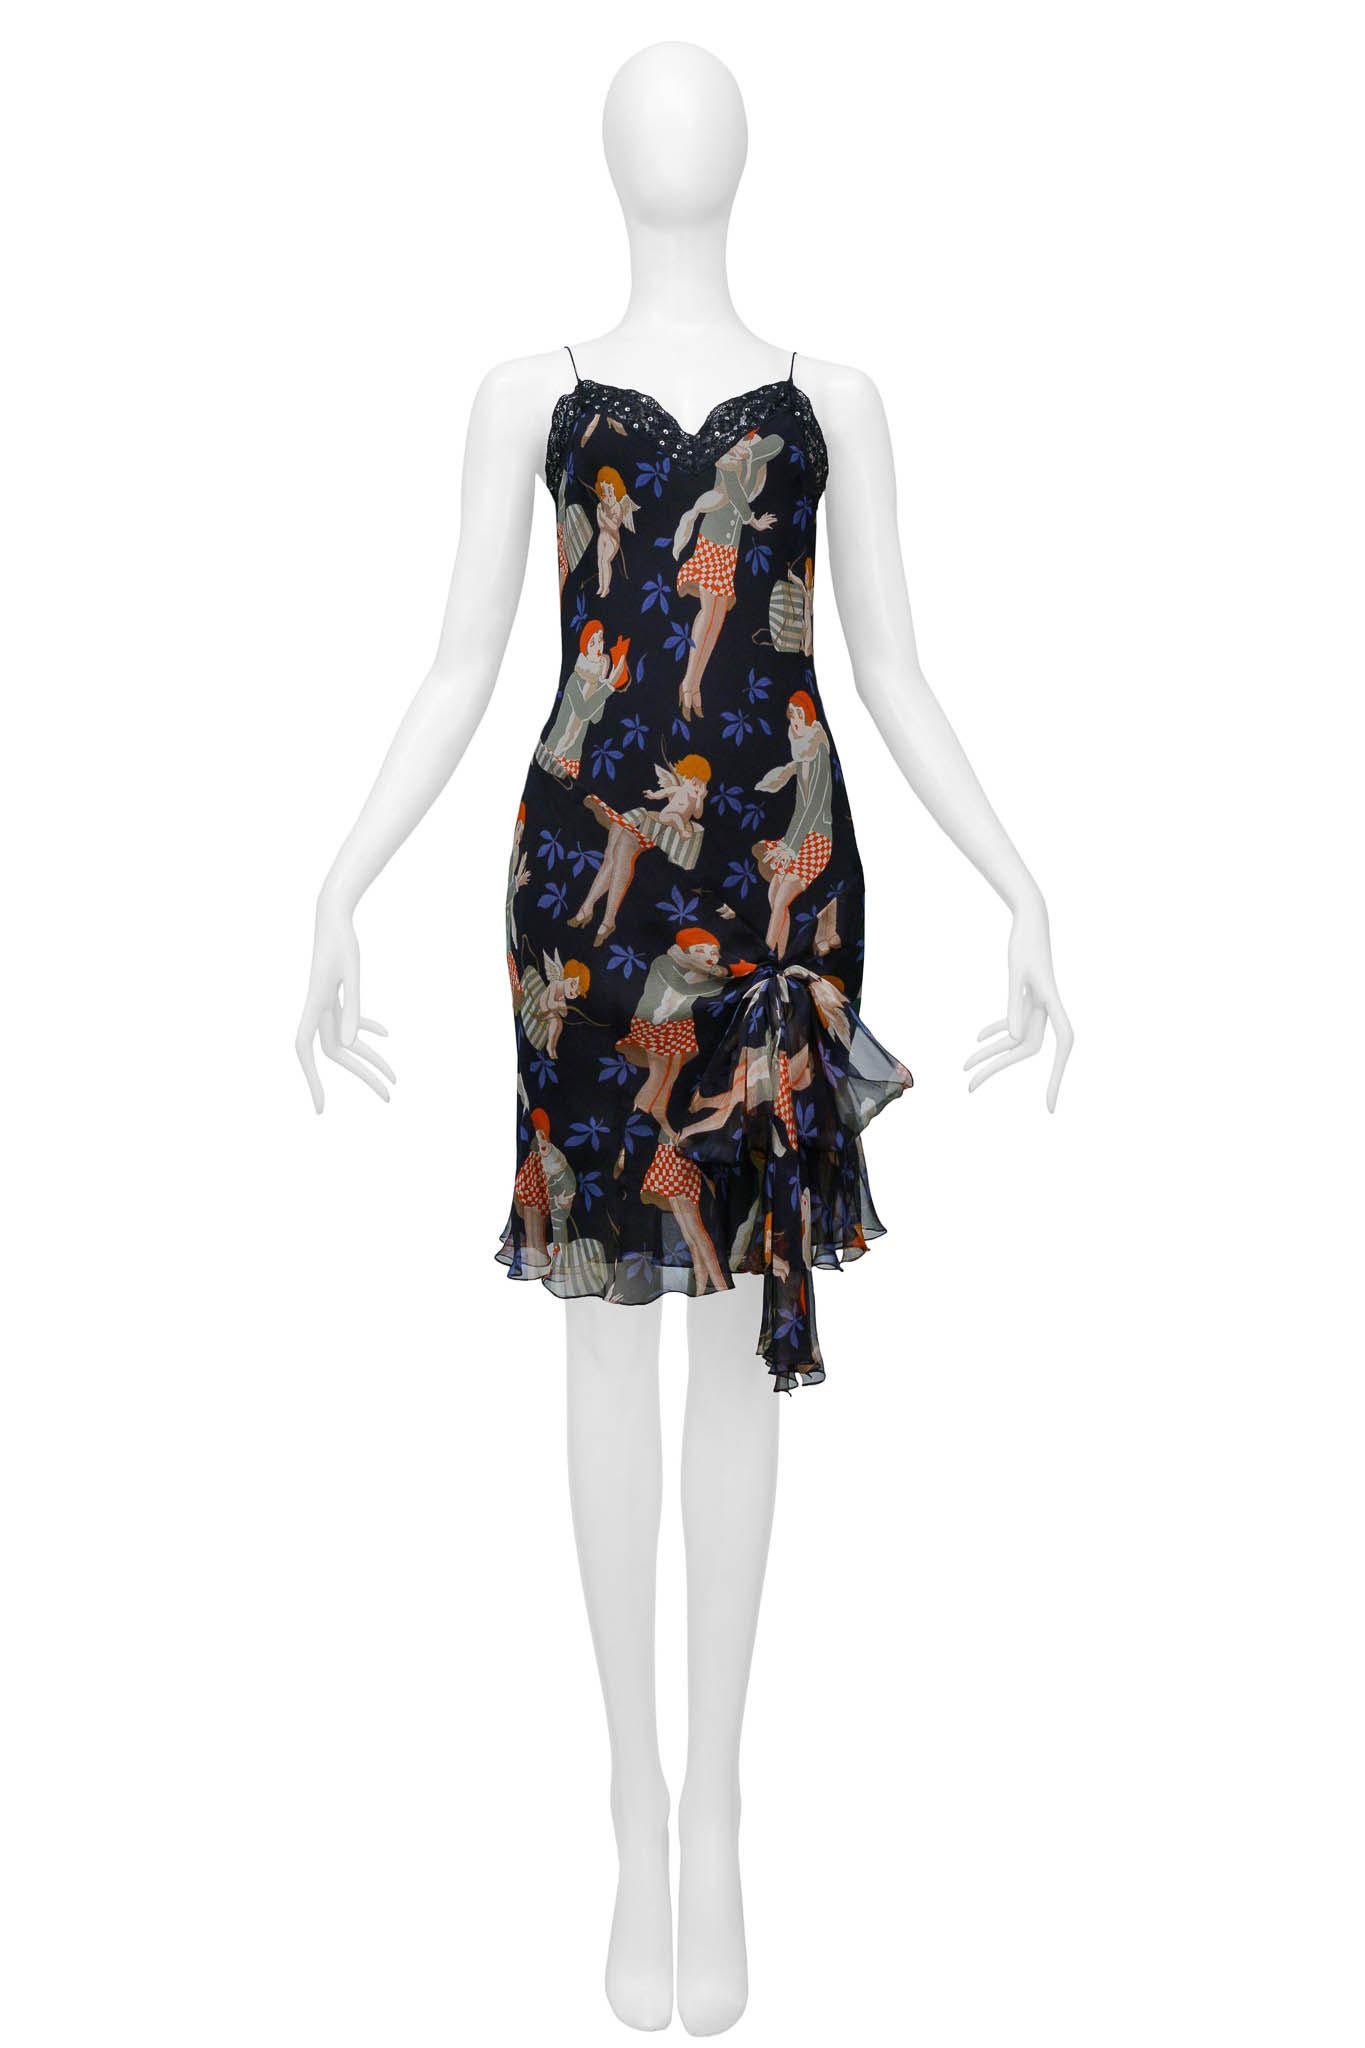 Resurrection Vintage is pleased to offer a vintage John Galliano black slip dress featuring a print with 1920's girls and cupids, black lace trim, and a bow on the front.

John Galliano 
Size 40
100% Silk
Excellent Vintage Condition 
Authenticity